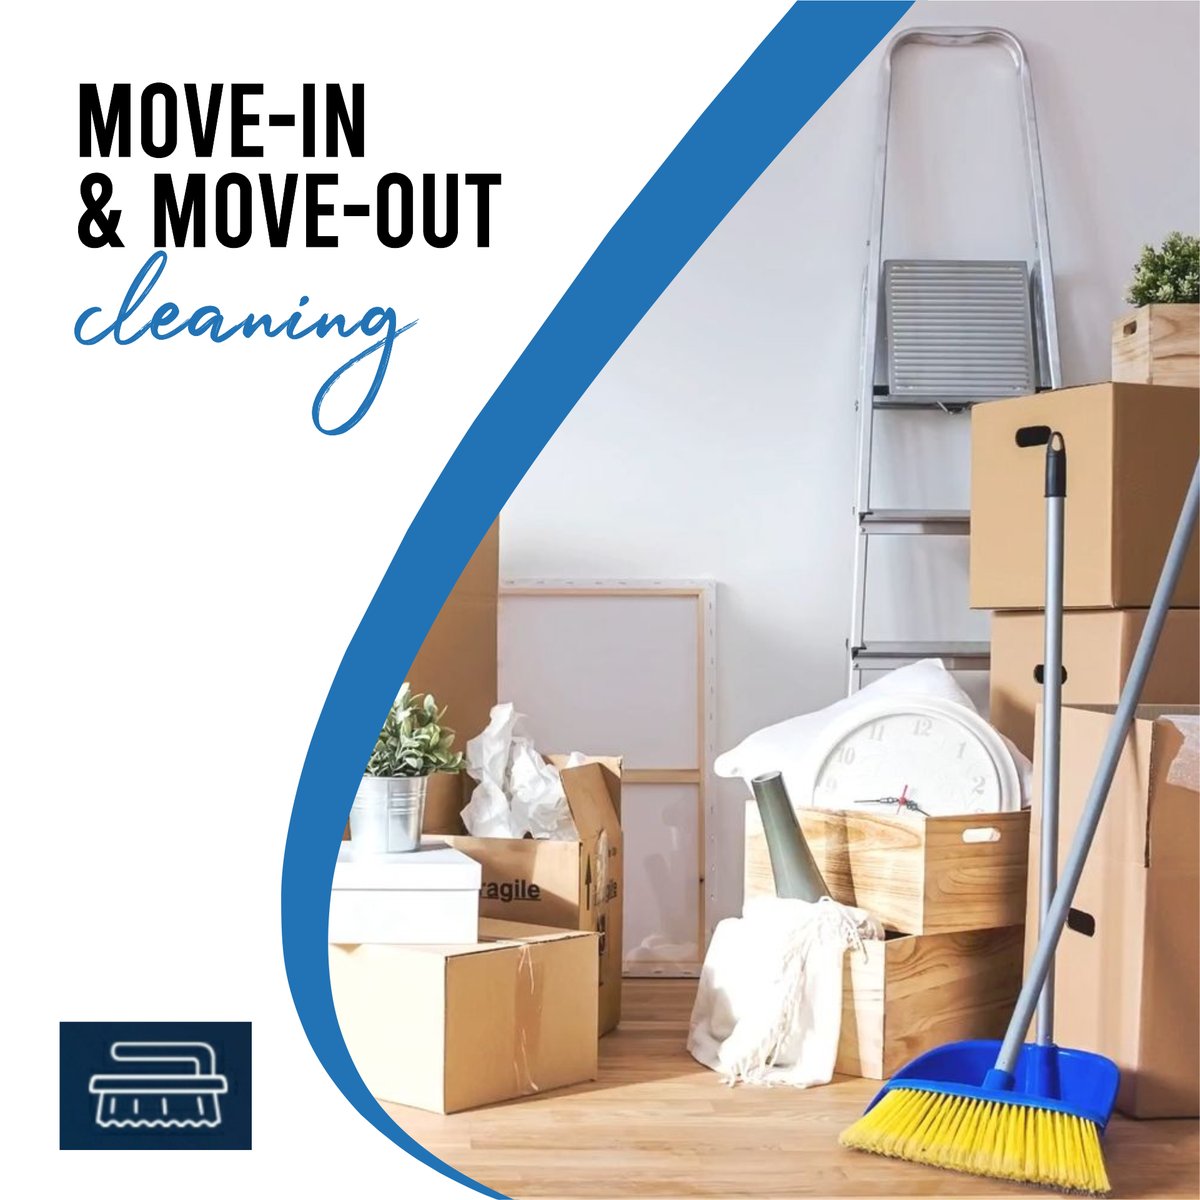 Moving can be stressful enough without worrying about having to tidy up after you’re finished. We are here to take the stress out of moving.

#stressfreemoving #movewithease #cleanmove #movingmadeeasy #noworriesmoving #hometransition #moveinmoveout #smoothmoving #newbeginnings